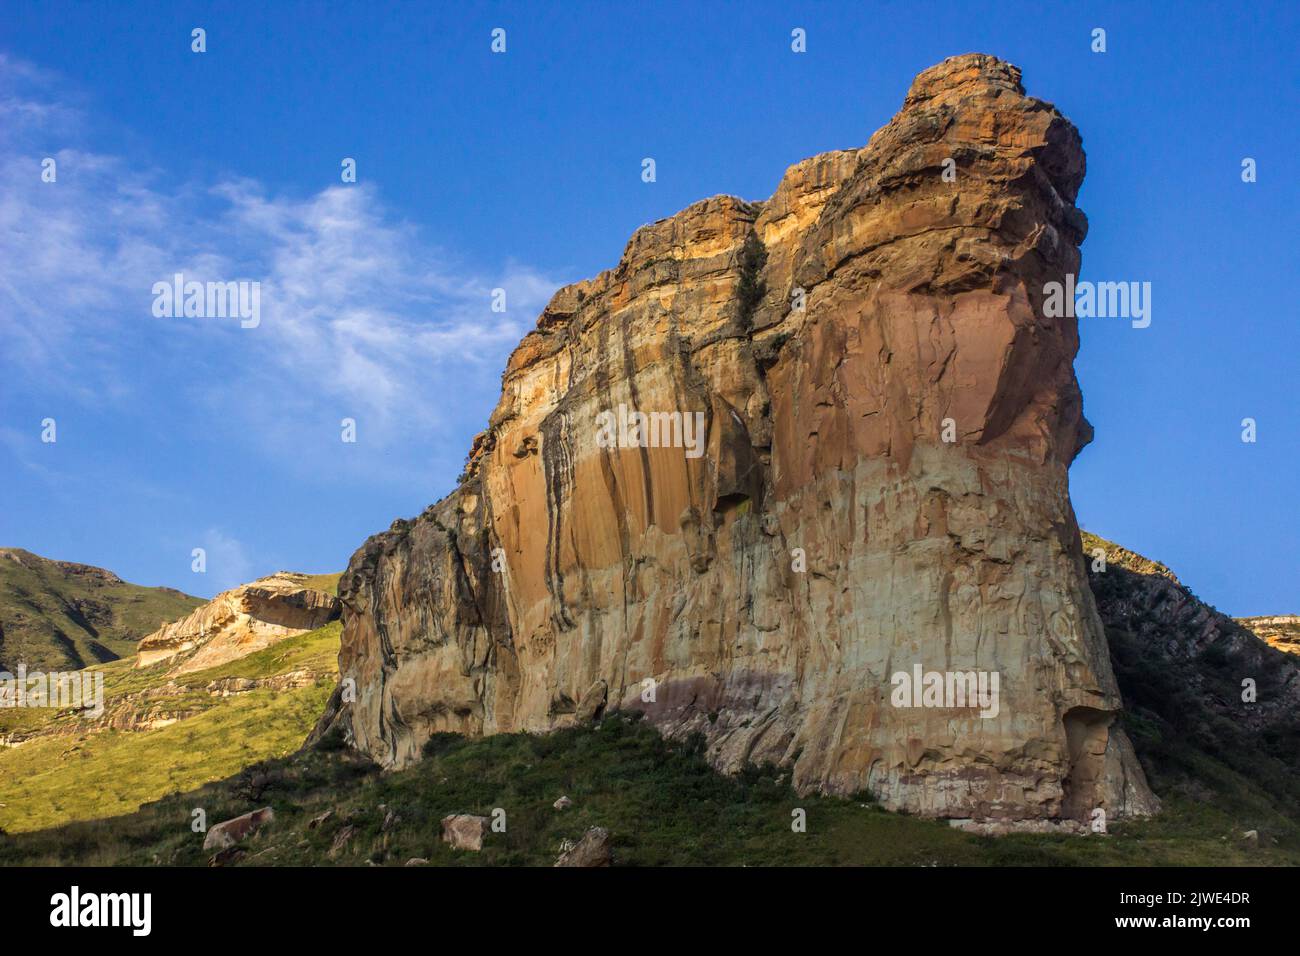 Looking up at the Impressive Sandstone Buttress, called the Brandwag, in the Golden Gate Highlands National Park, South Africa Stock Photo